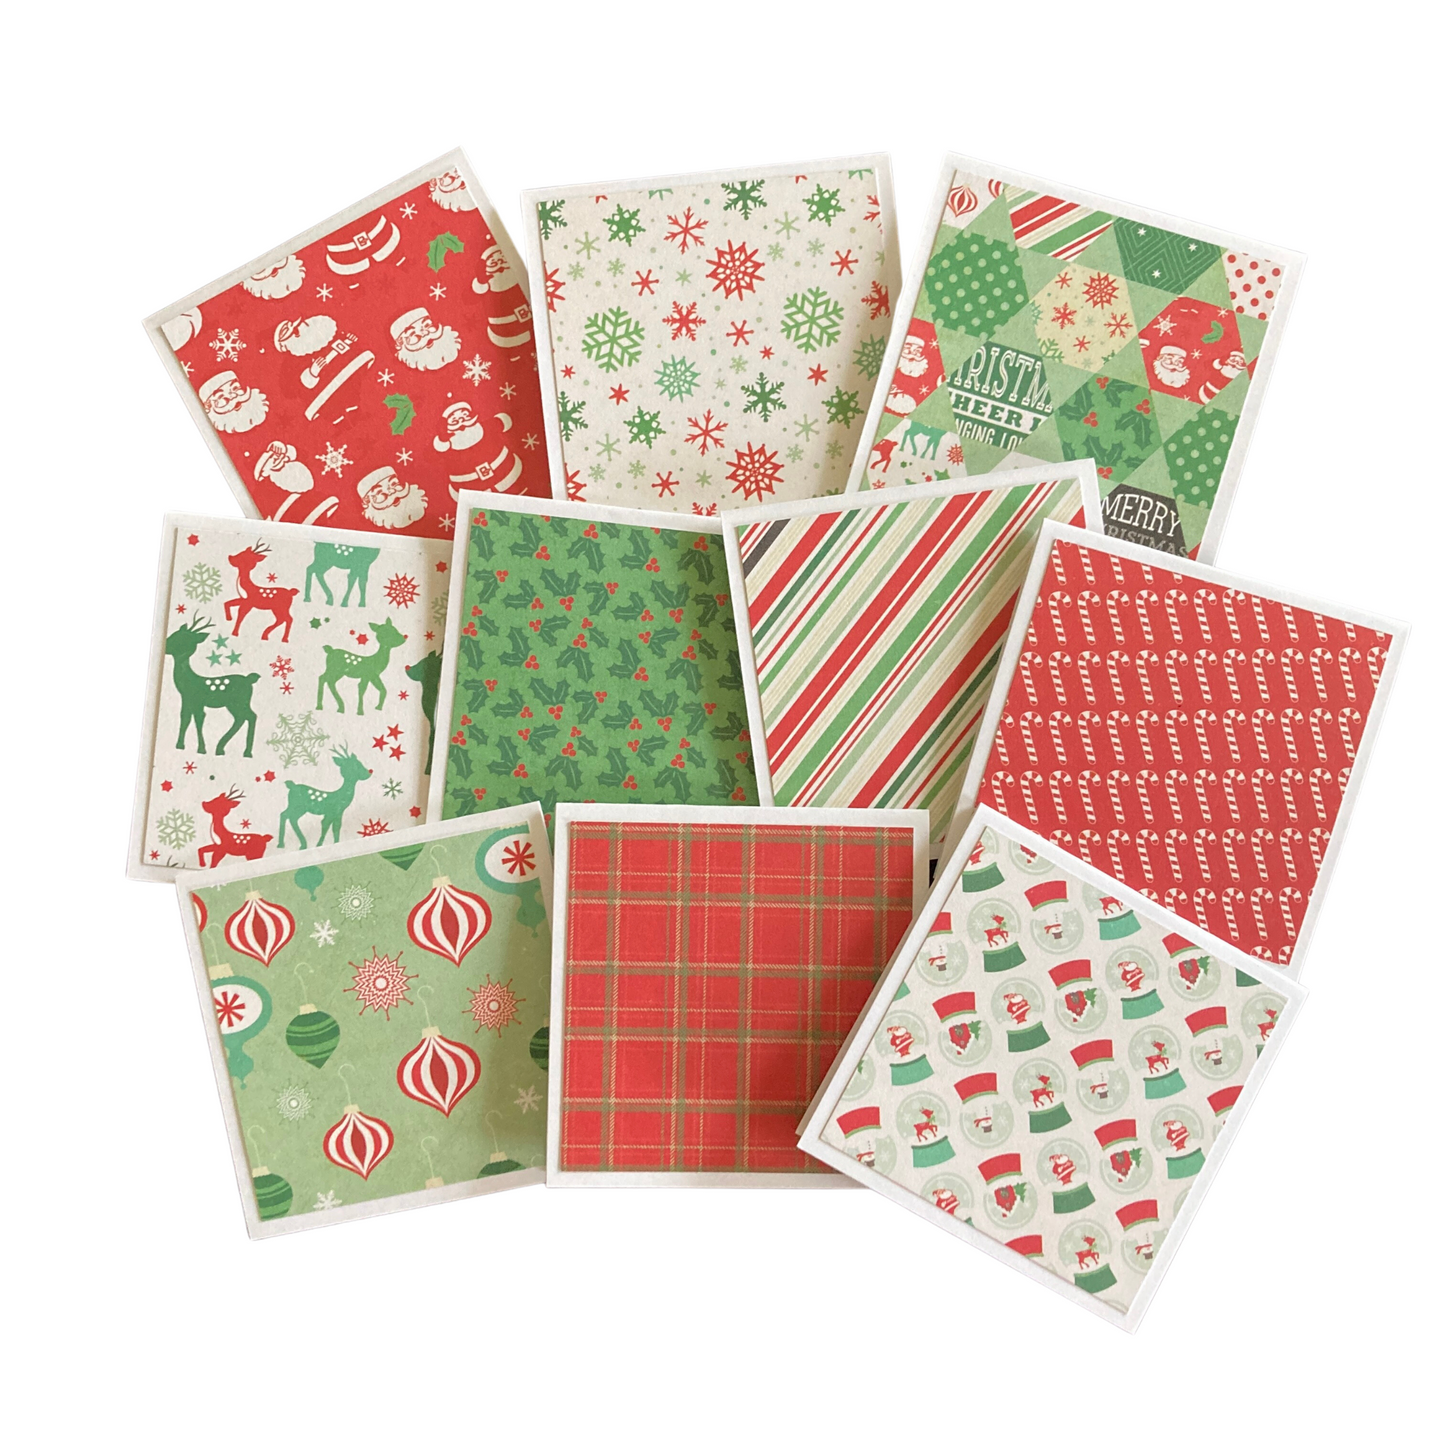 3x3 Christmas Cheer Note Cards